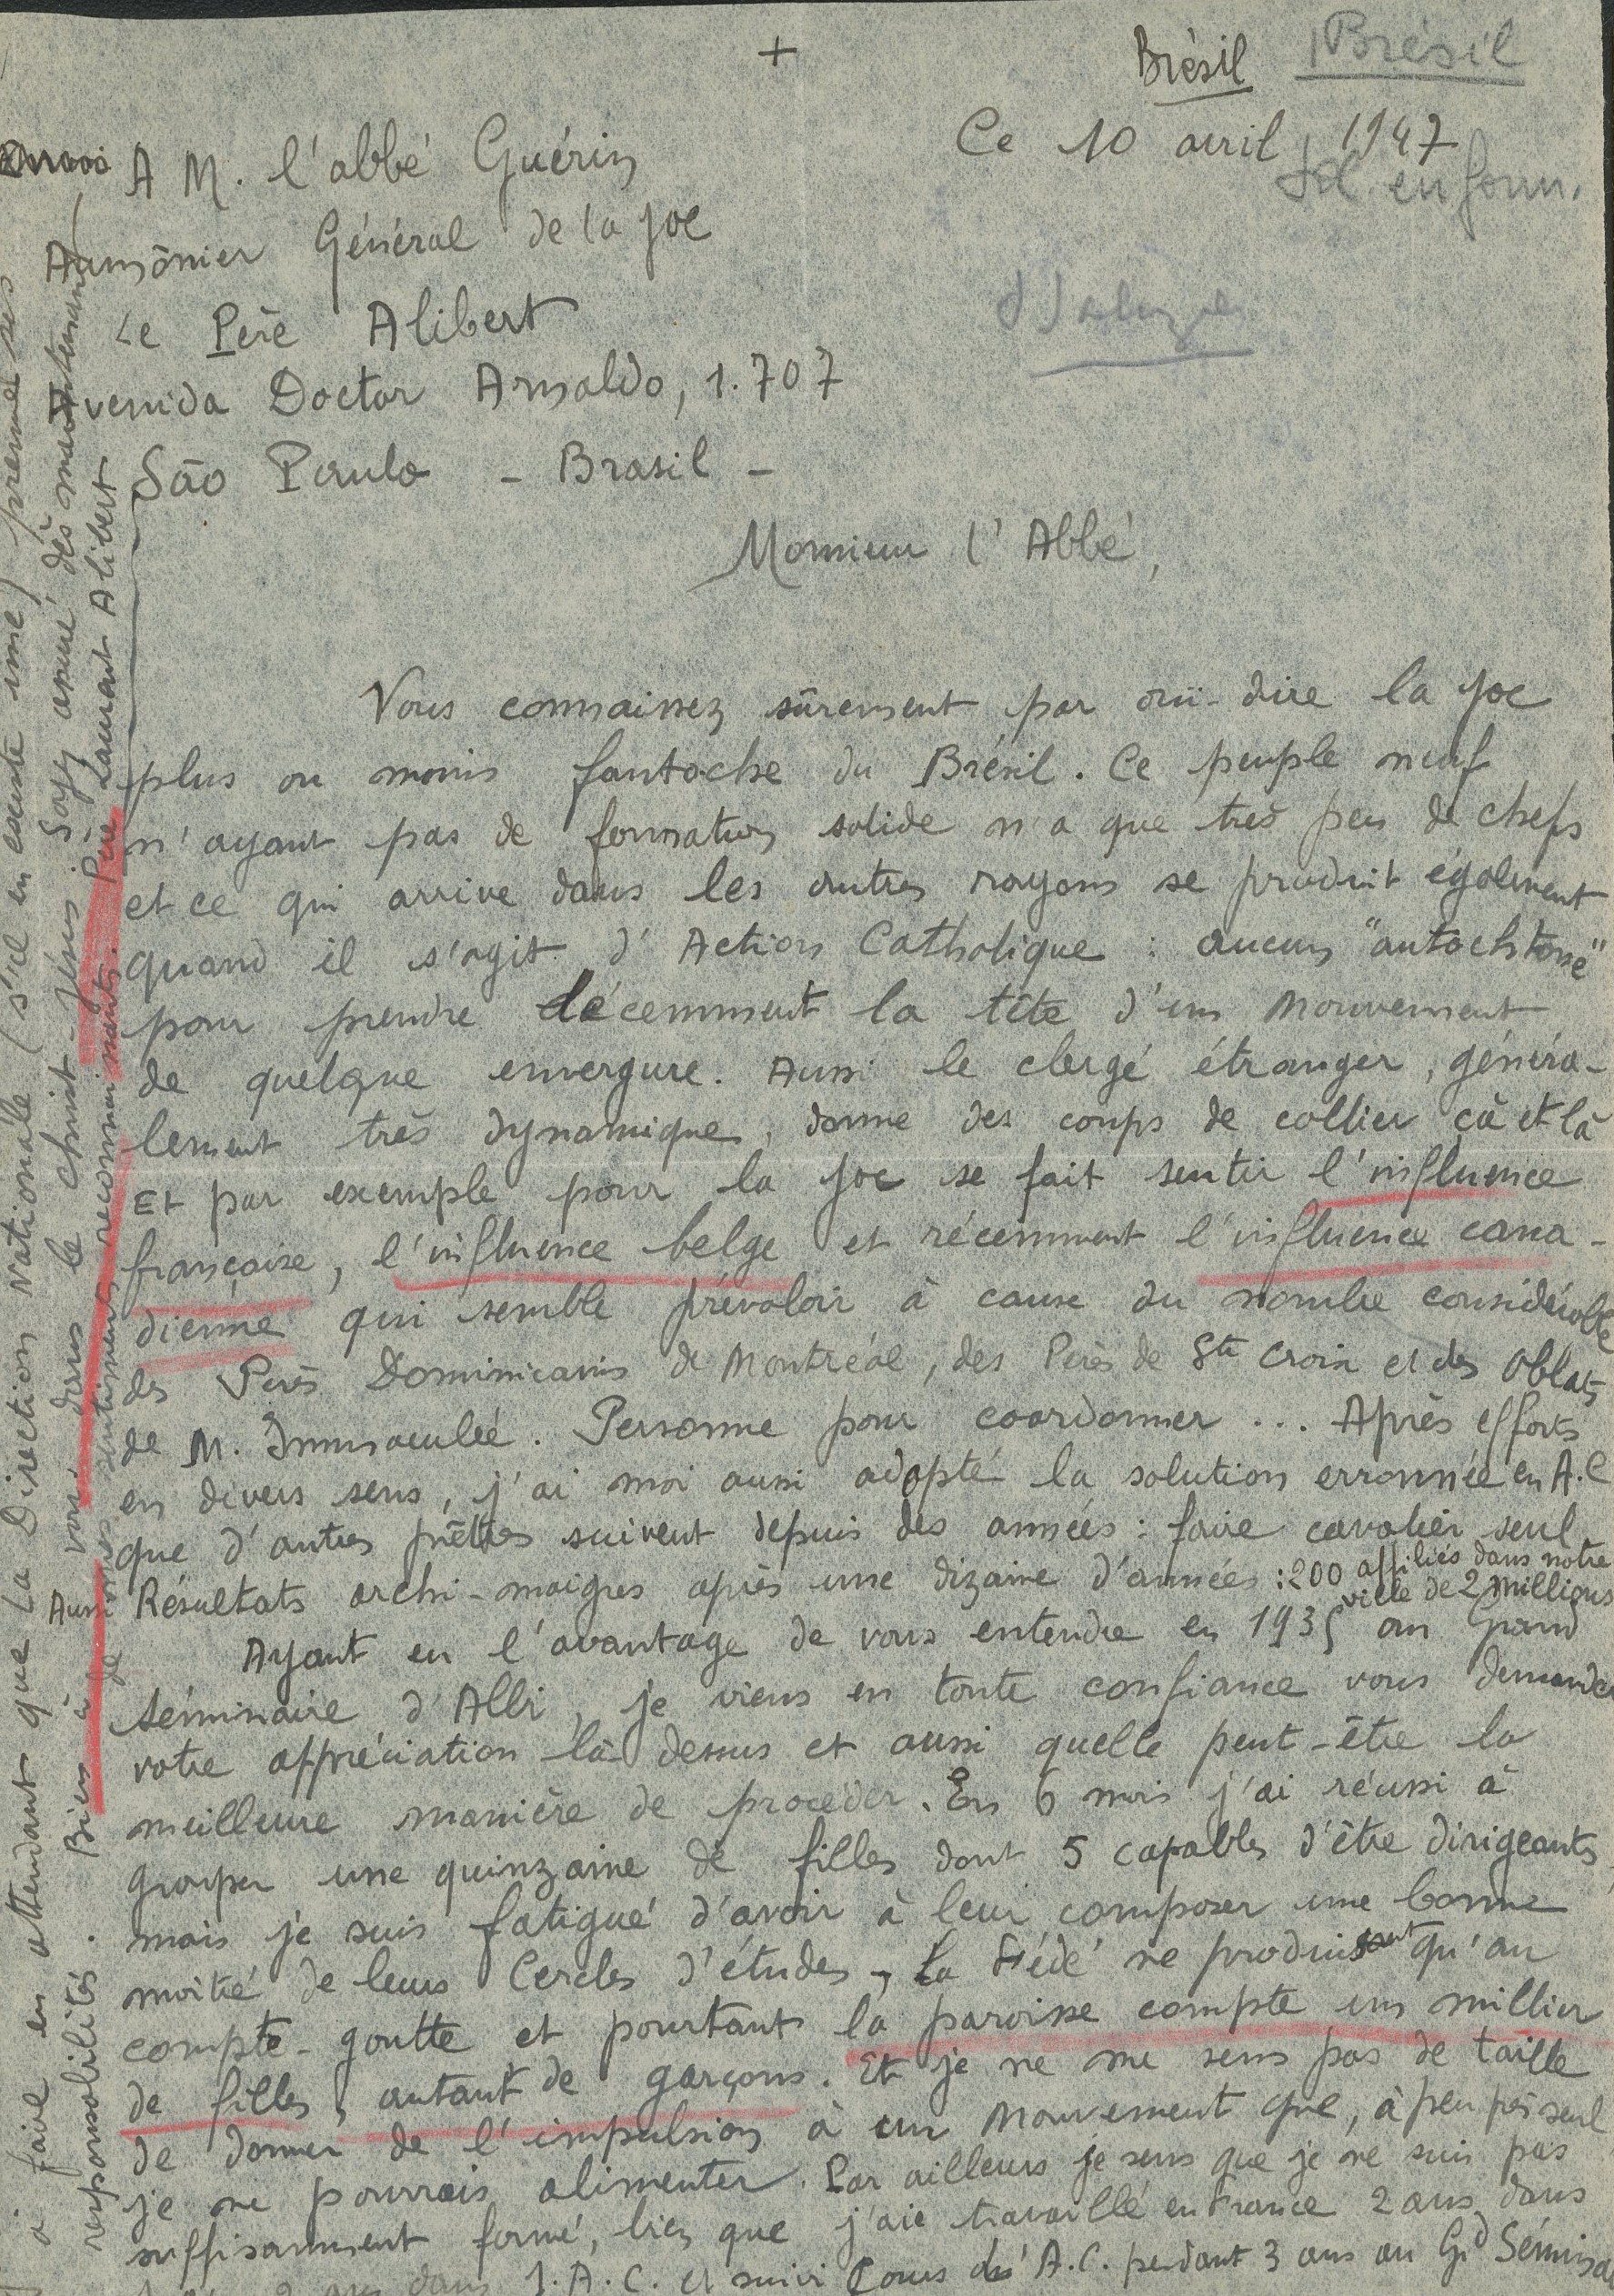 Father Alibert’s emotional letter to abbé Guérin, the International Chaplain of the IYCW